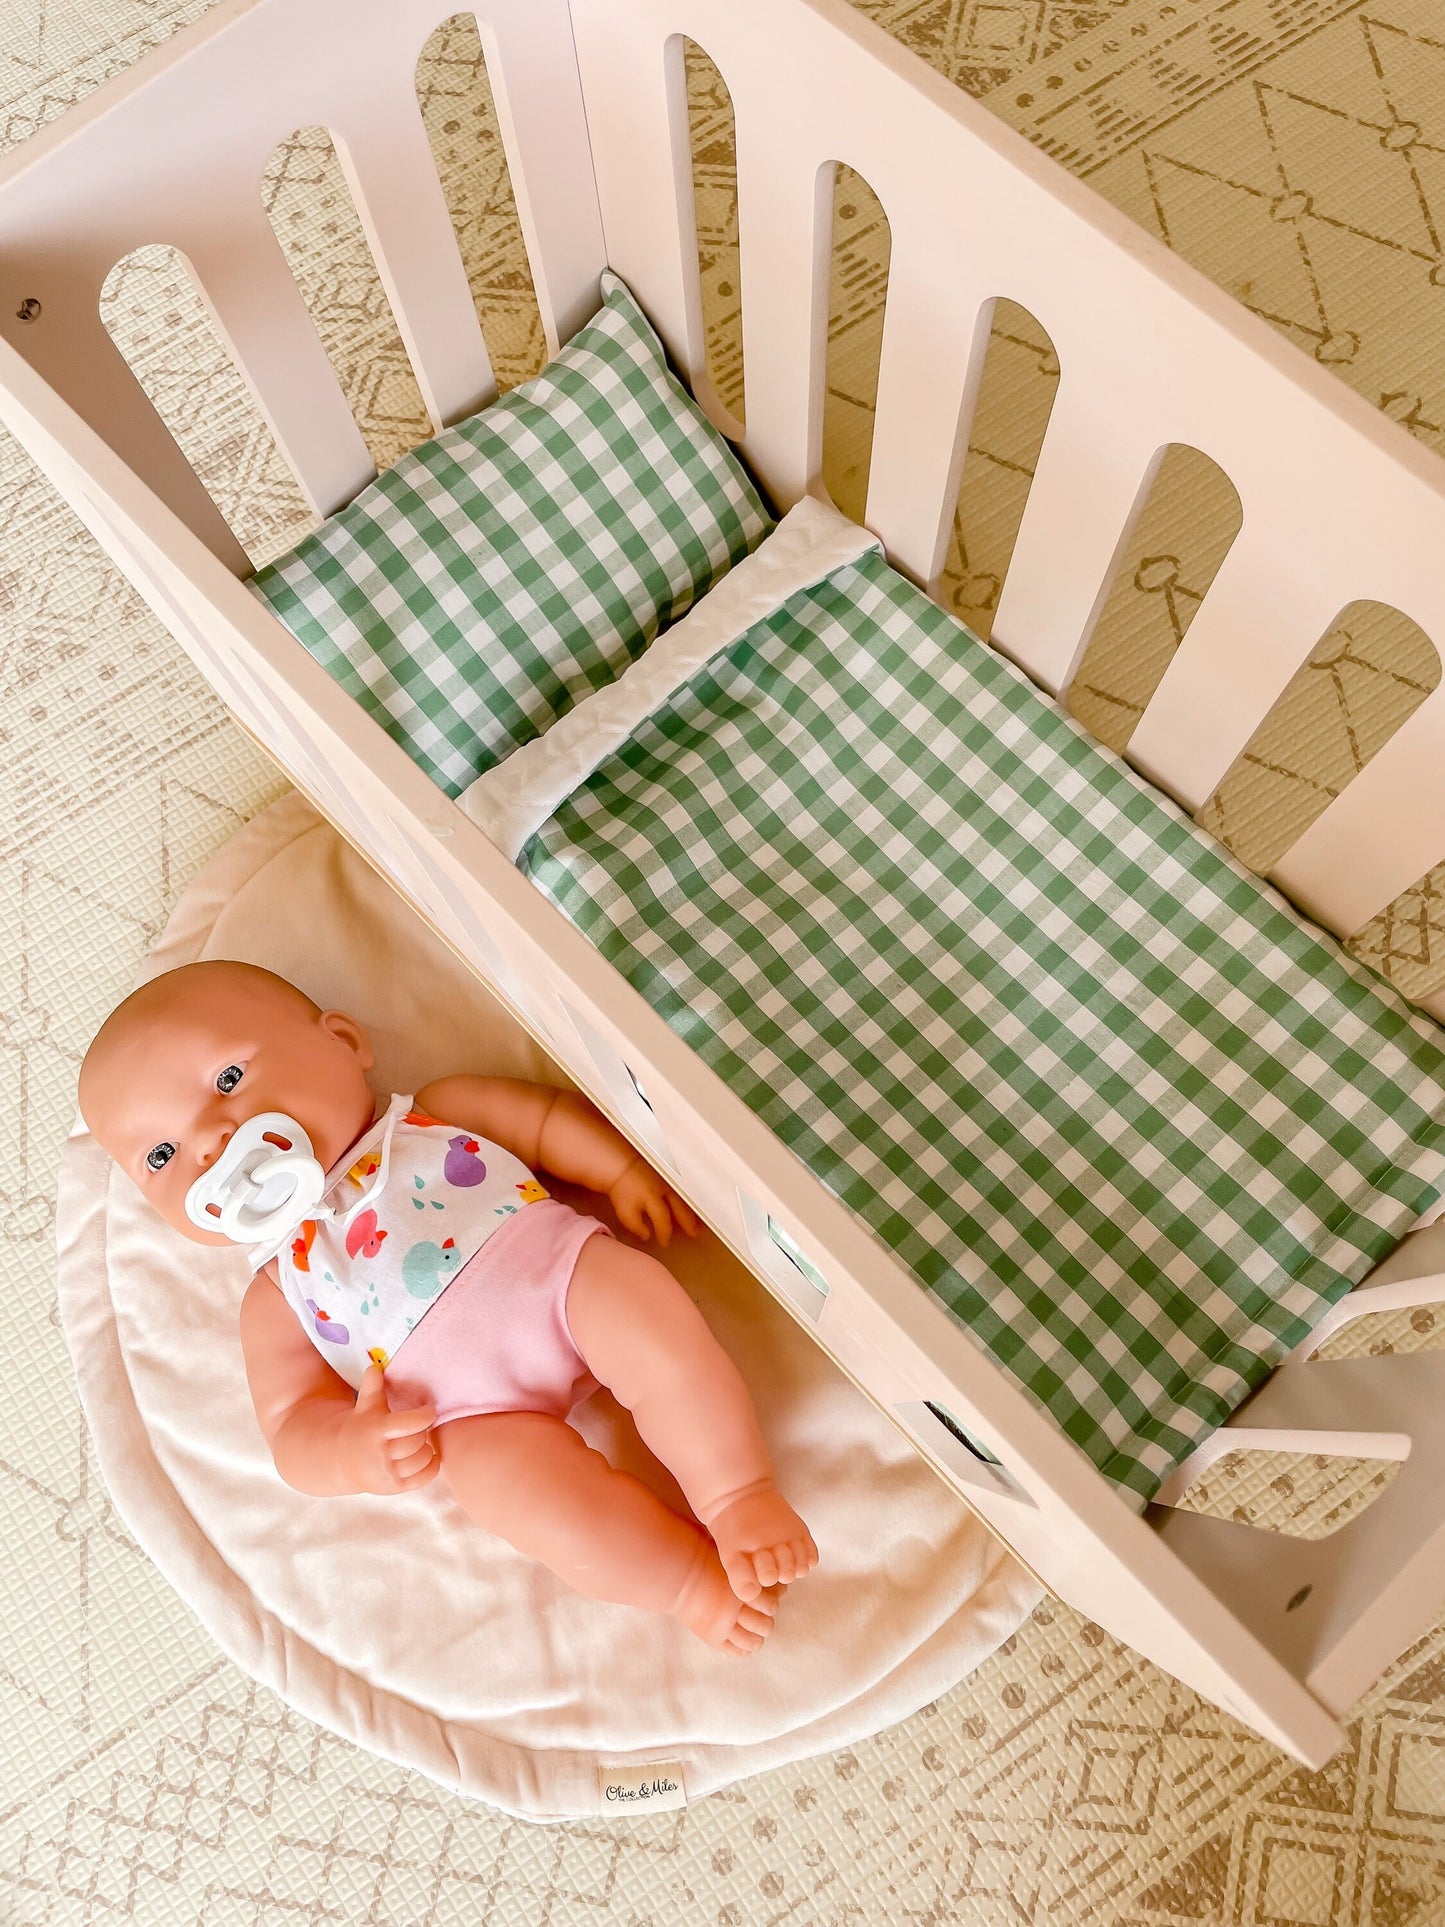 Gingham Doll Bedding | Gift for nephew | Crib sheet and pillow toy set | Doll Bed Cover Linen | Cot Blanket | Crib Bedding | Pram Pillows